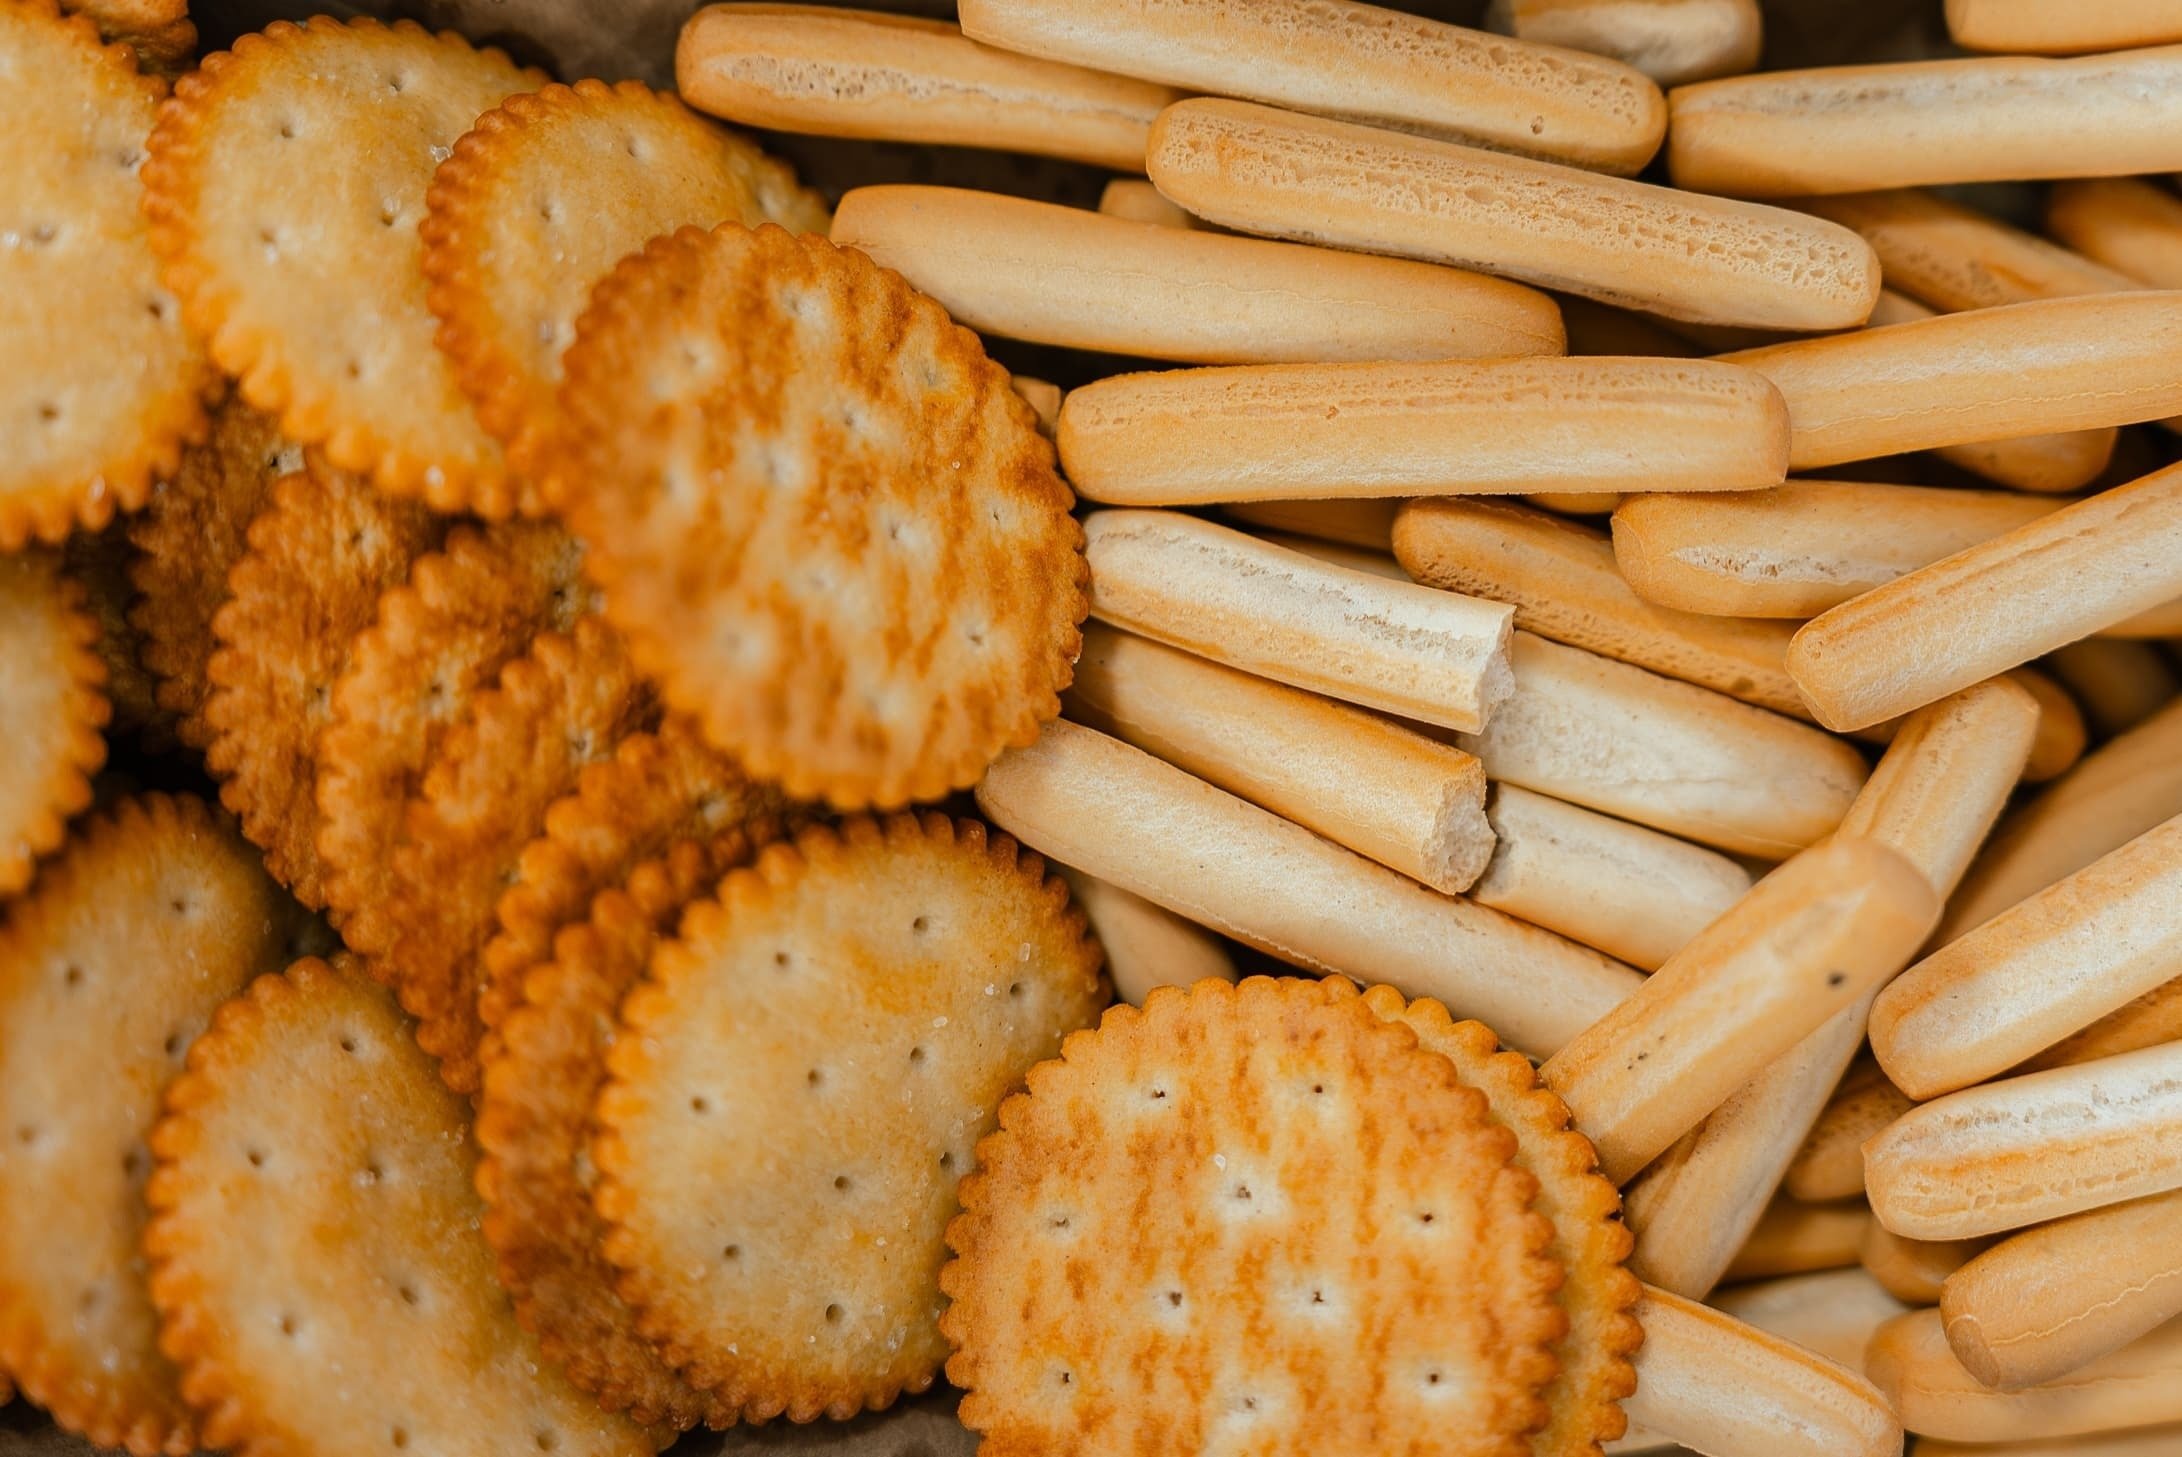 a pile of crackers next to a pile of sticks